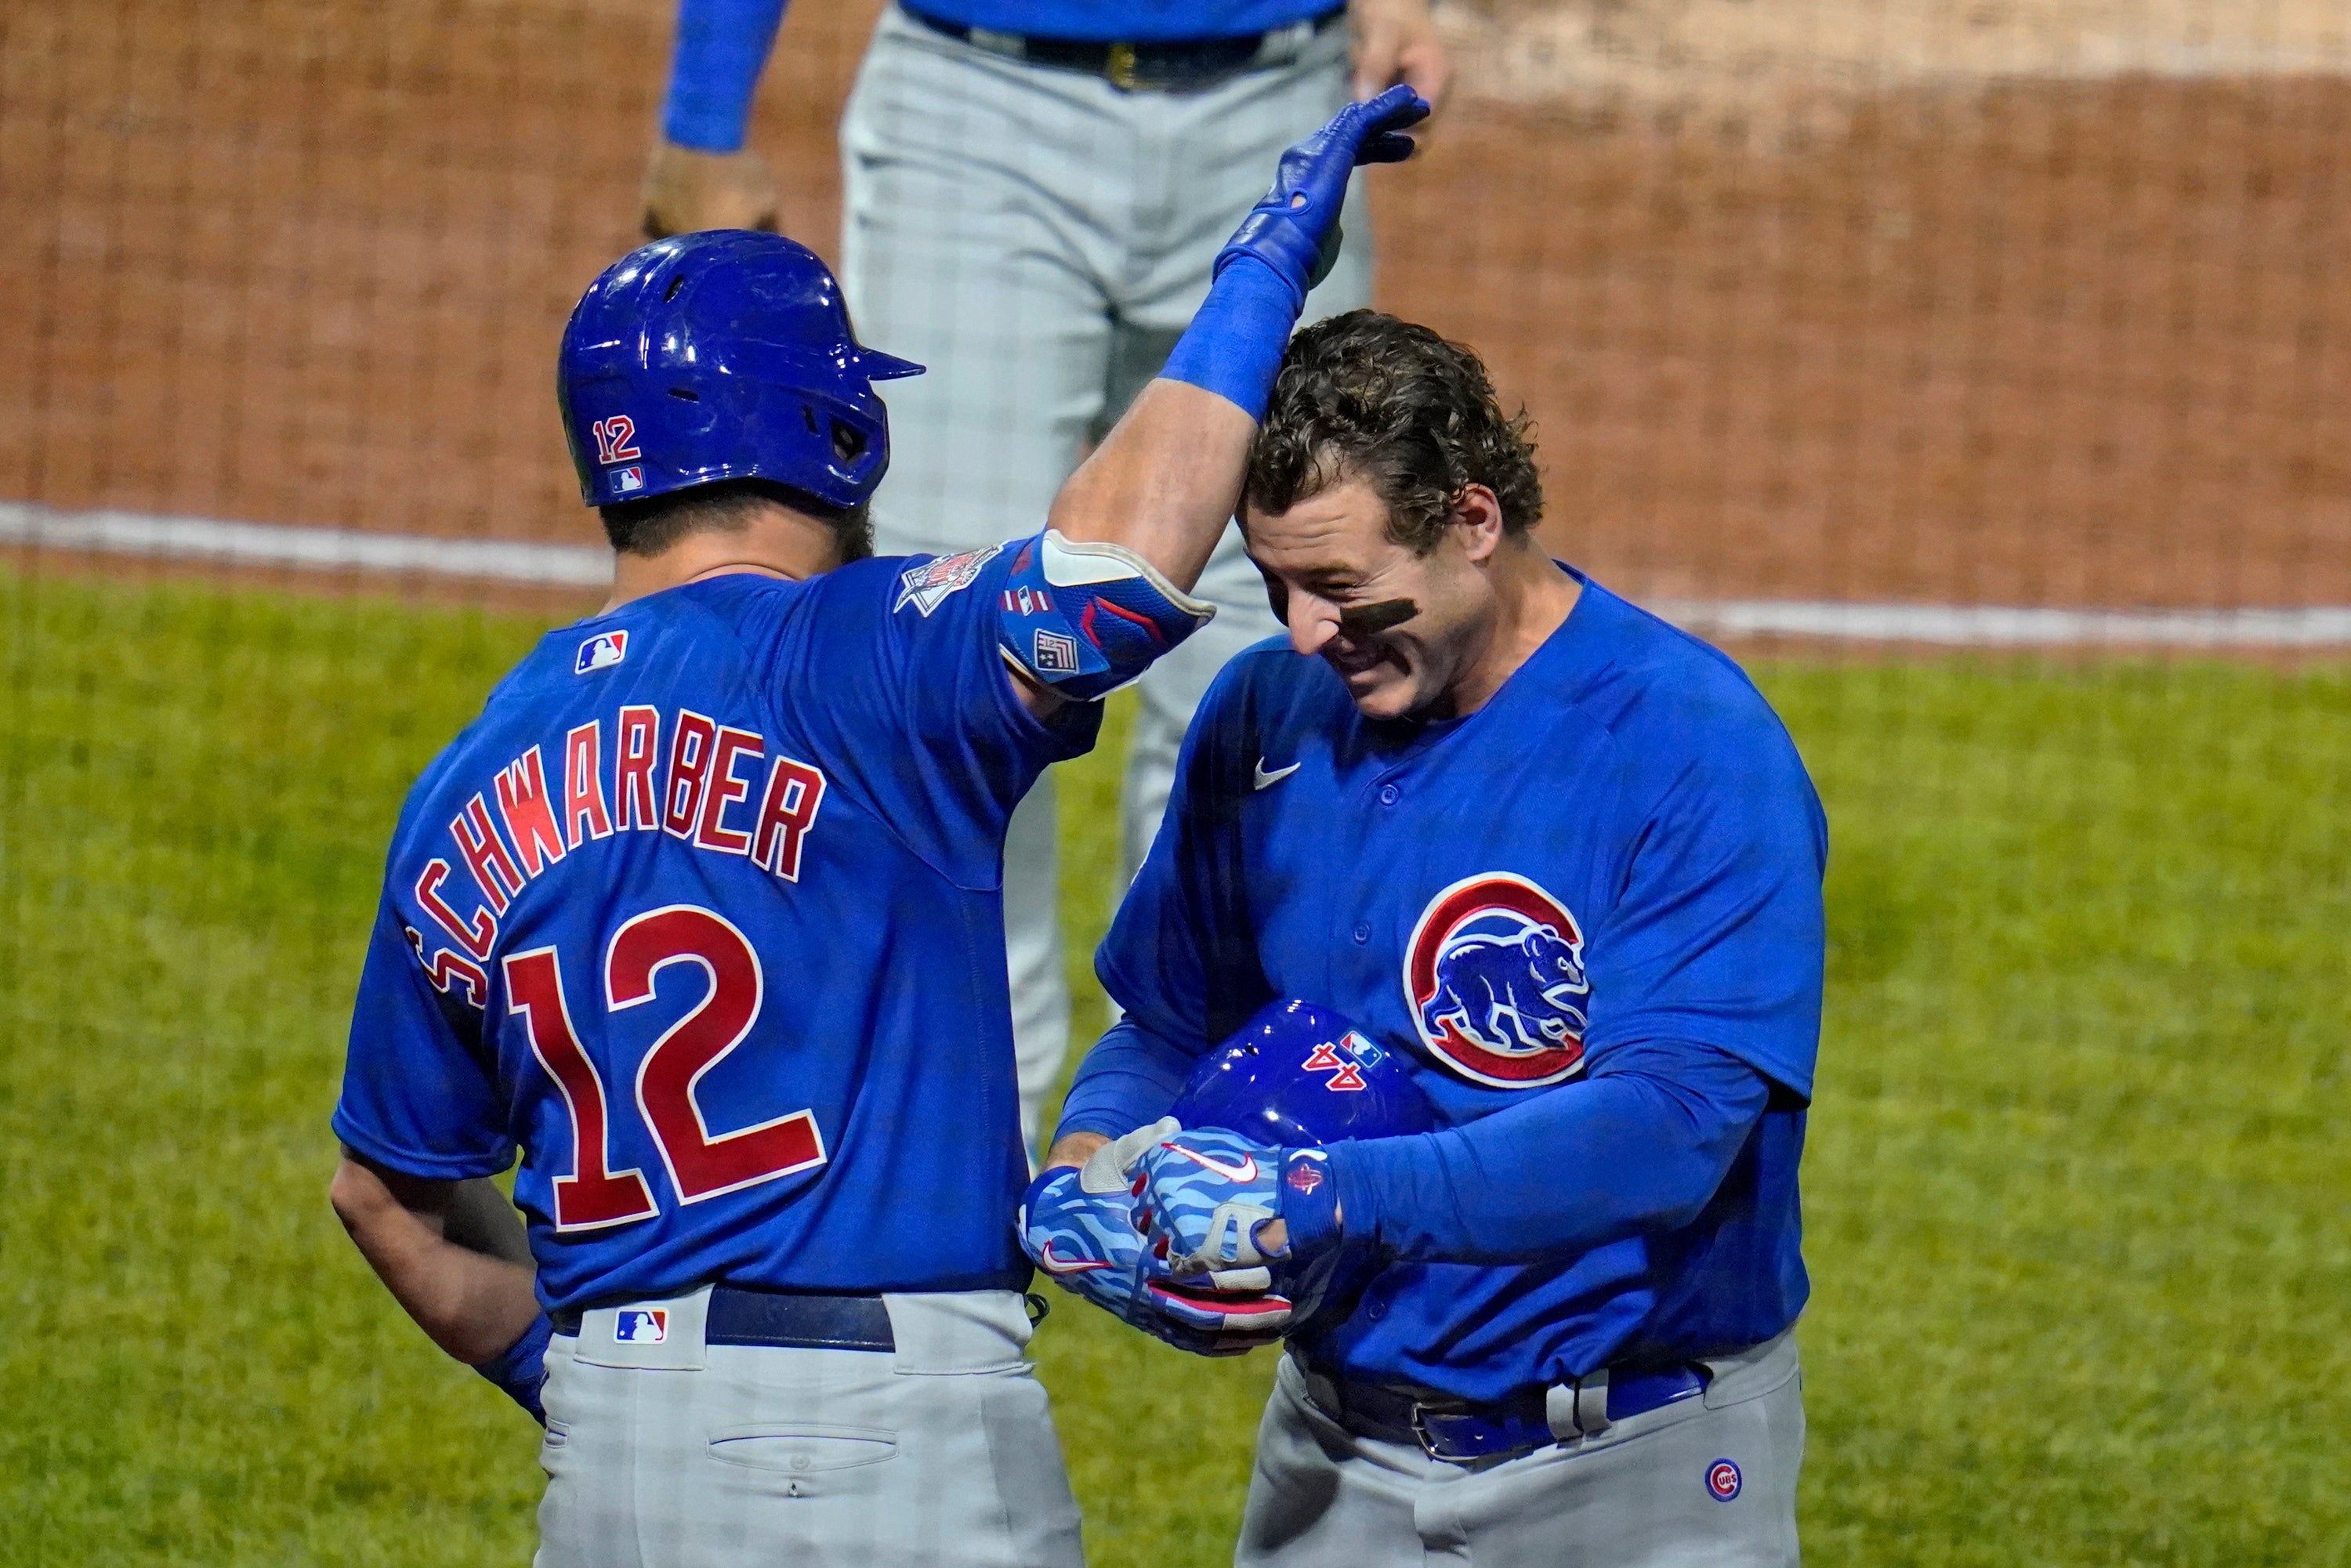 Cubs clinch playoff spot, Pirates win on Stallings HR in 9th